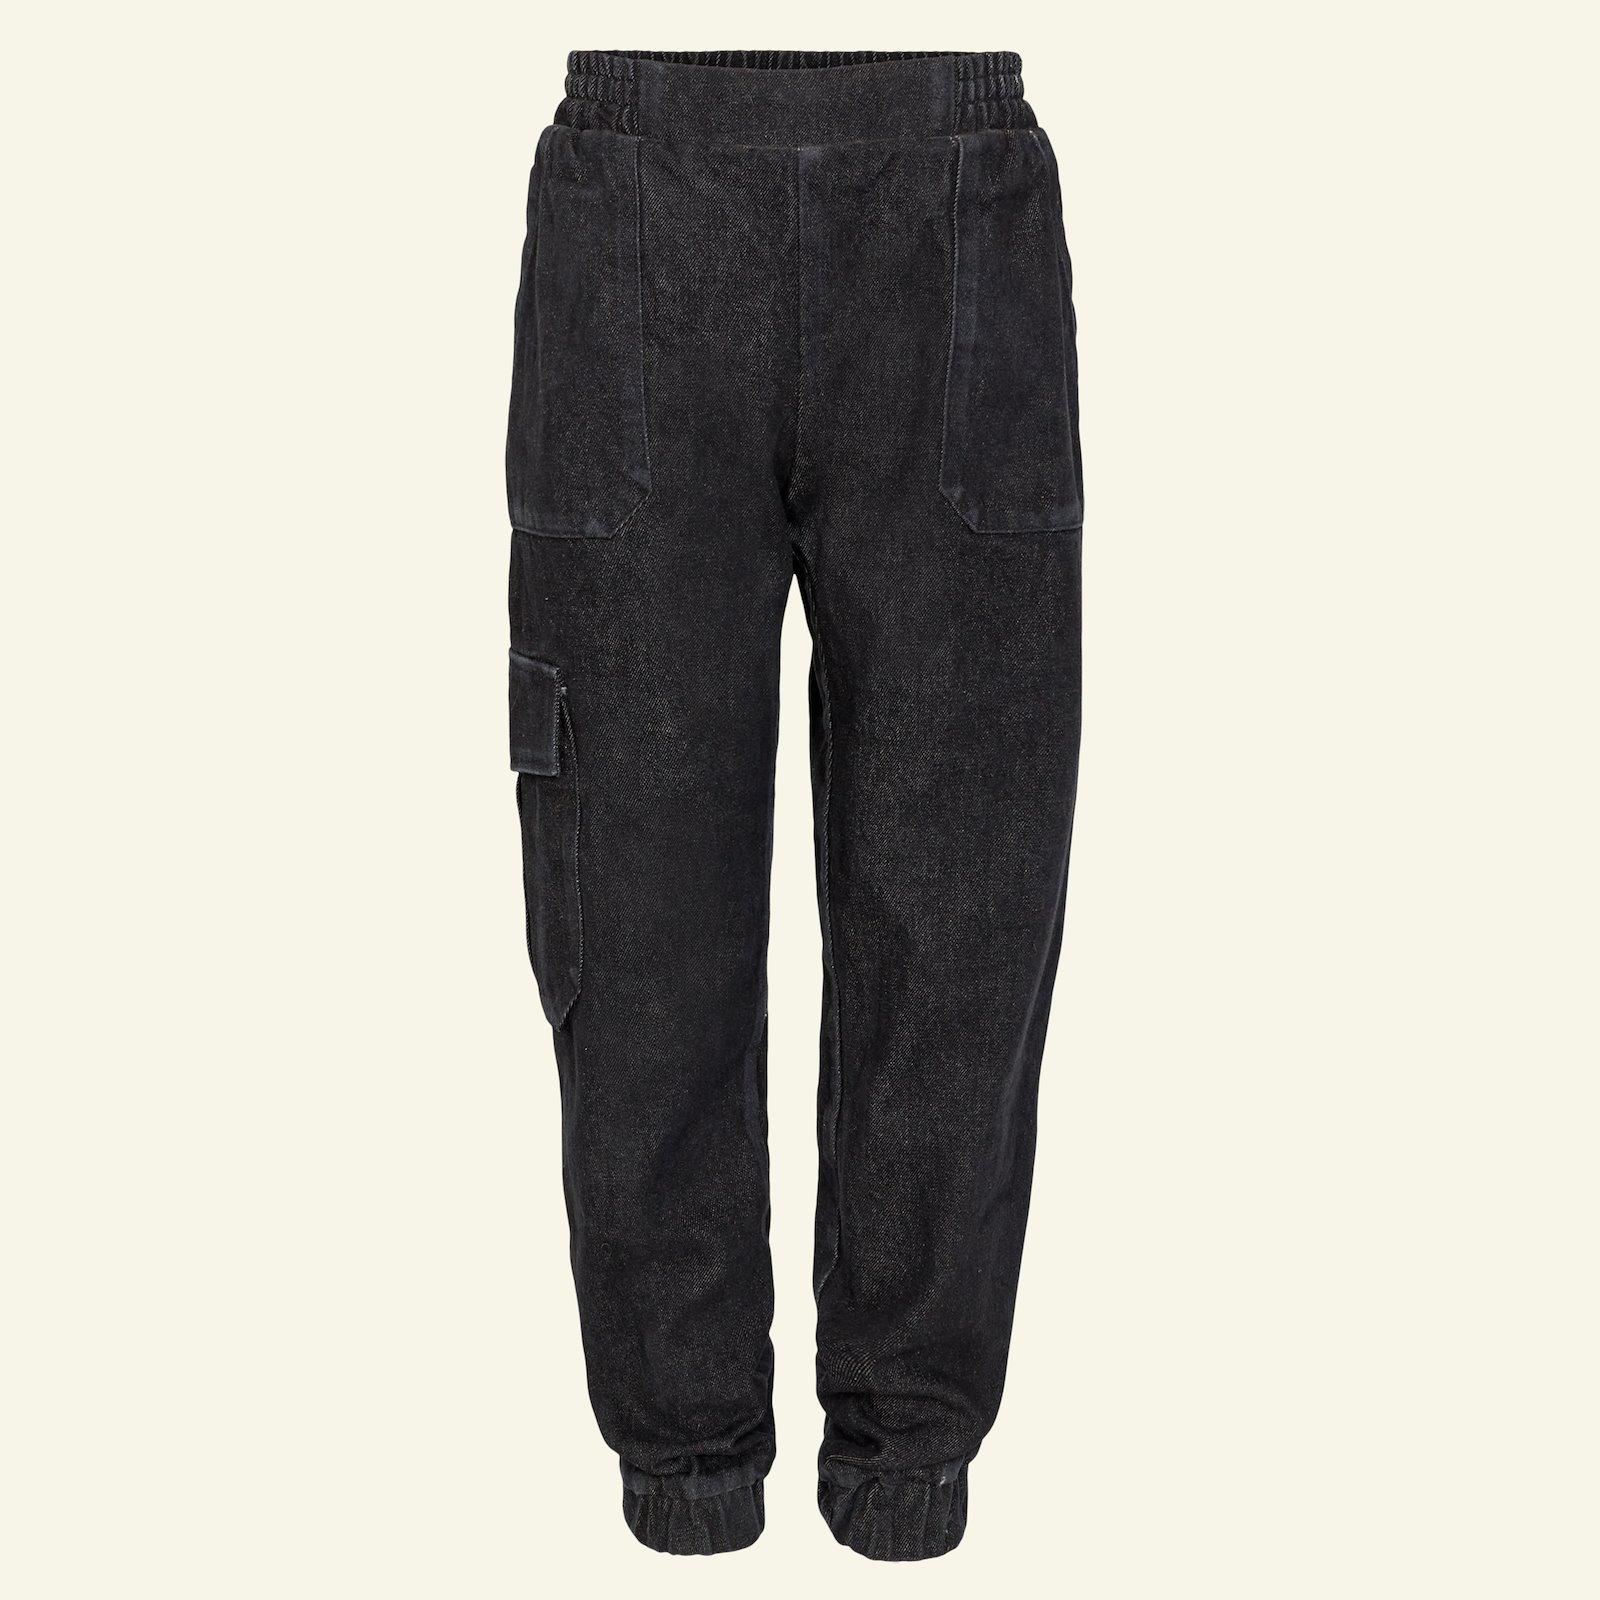 Cargo trousers, 140/10y p60037_5343_sskit